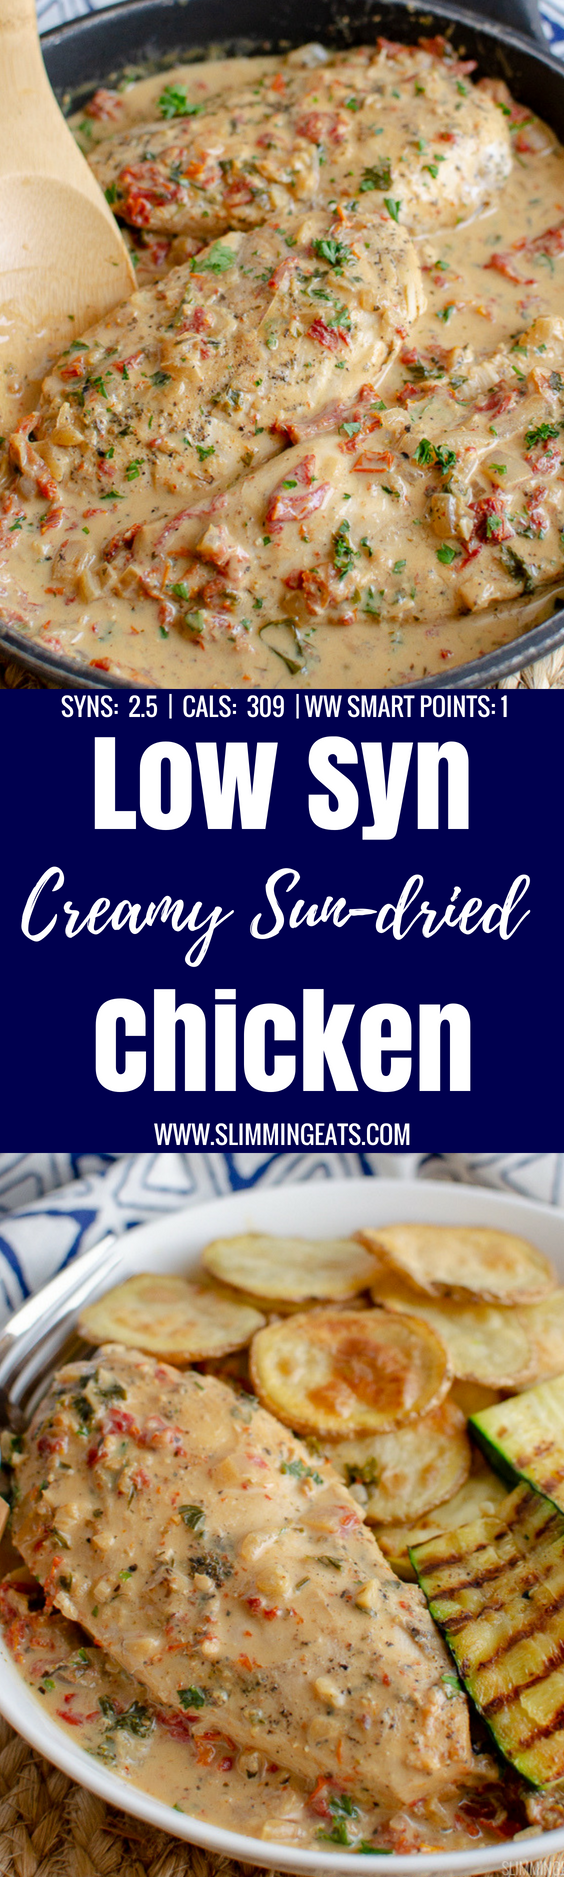 This Chicken in Sun-dried Tomato Creamy Sauce will quickly become a family favourite. Low in syns and perfect with a variety of sides. | gluten-free, slimming world and weight watchers friendly